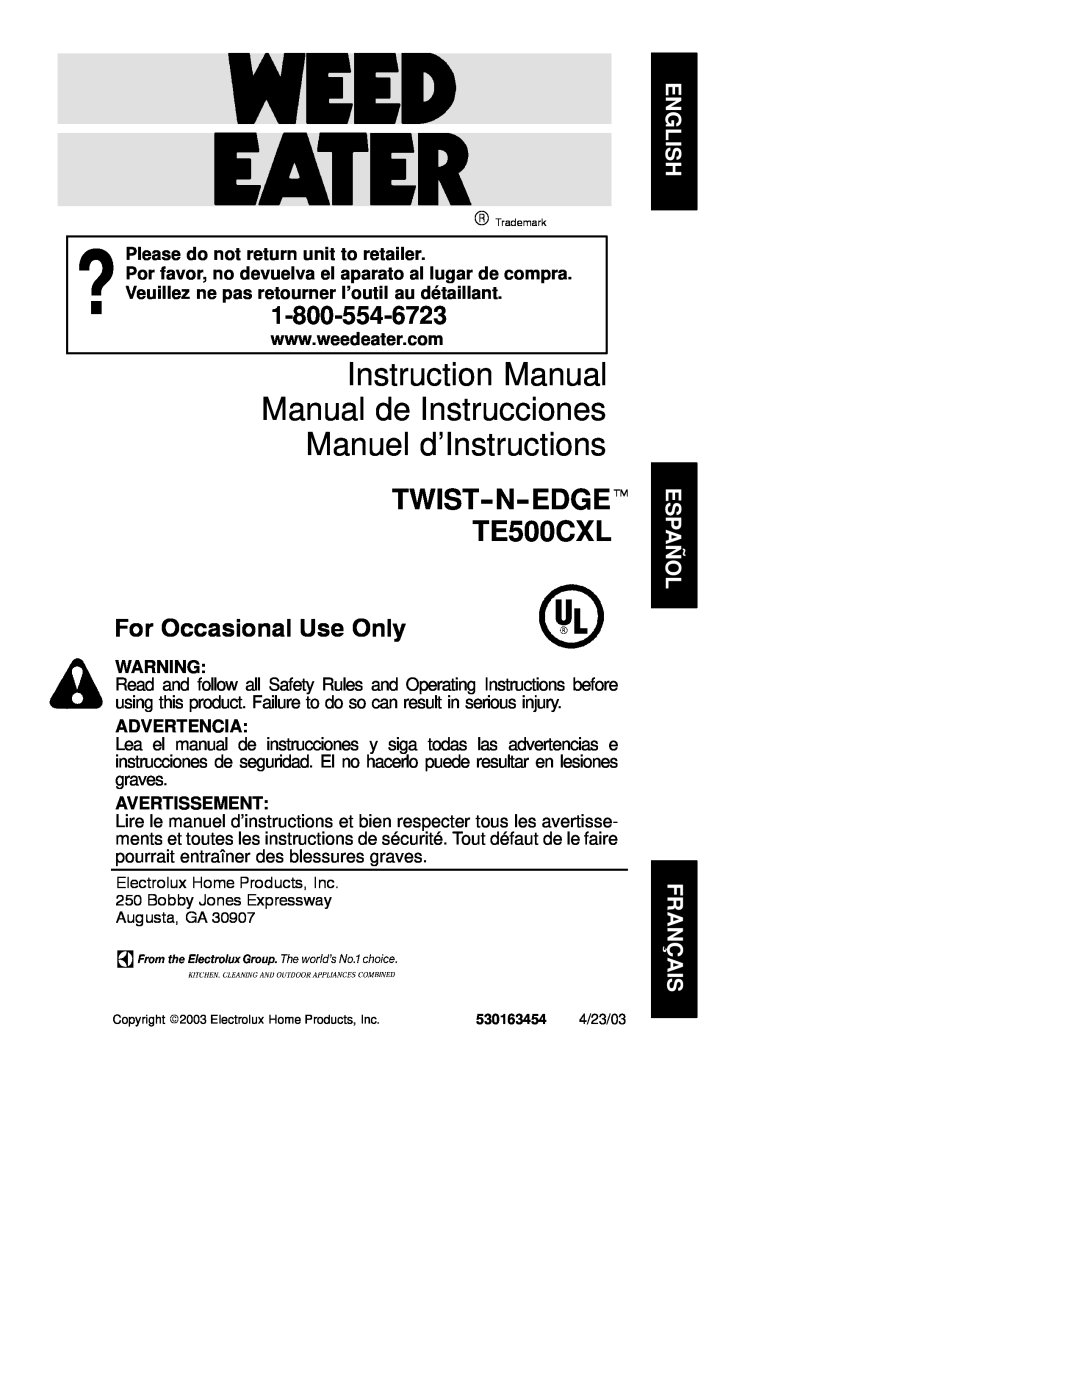 Weed Eater 530163454 instruction manual Manuel d’Instructions, TWIST-N-EDGEt TE500CXL, For Occasional Use Only 